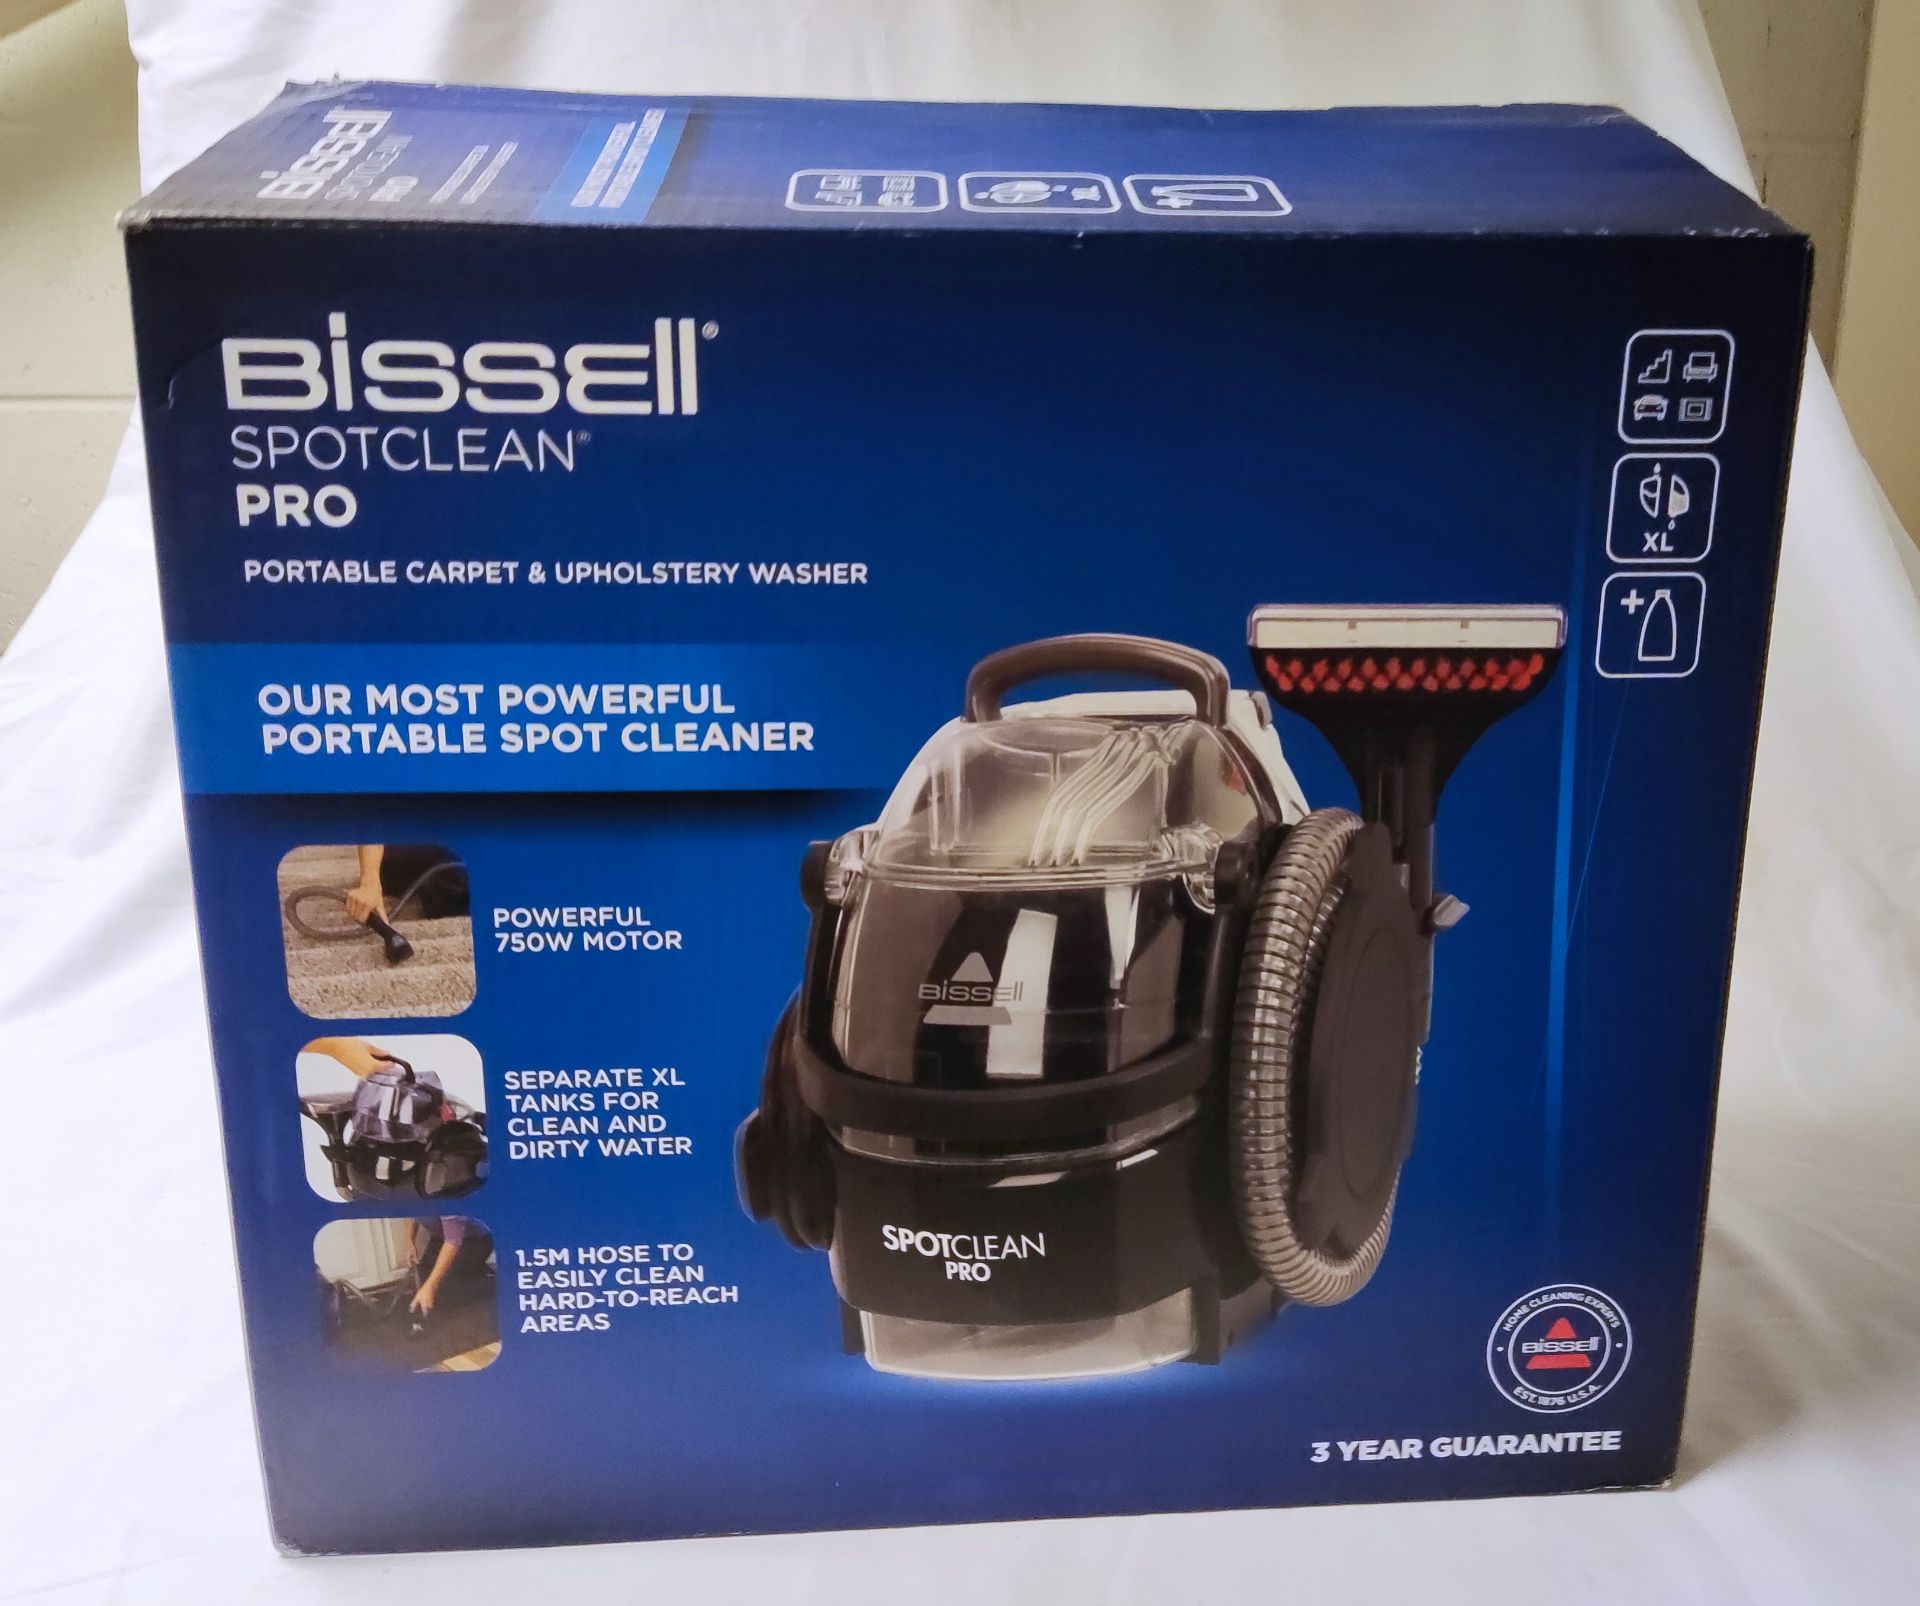 1 x BISSELL Spotclean Pro Portable Carpet & Upholstery Washer - New/Boxed - RRP £179.99 - Ref: - Image 12 of 15